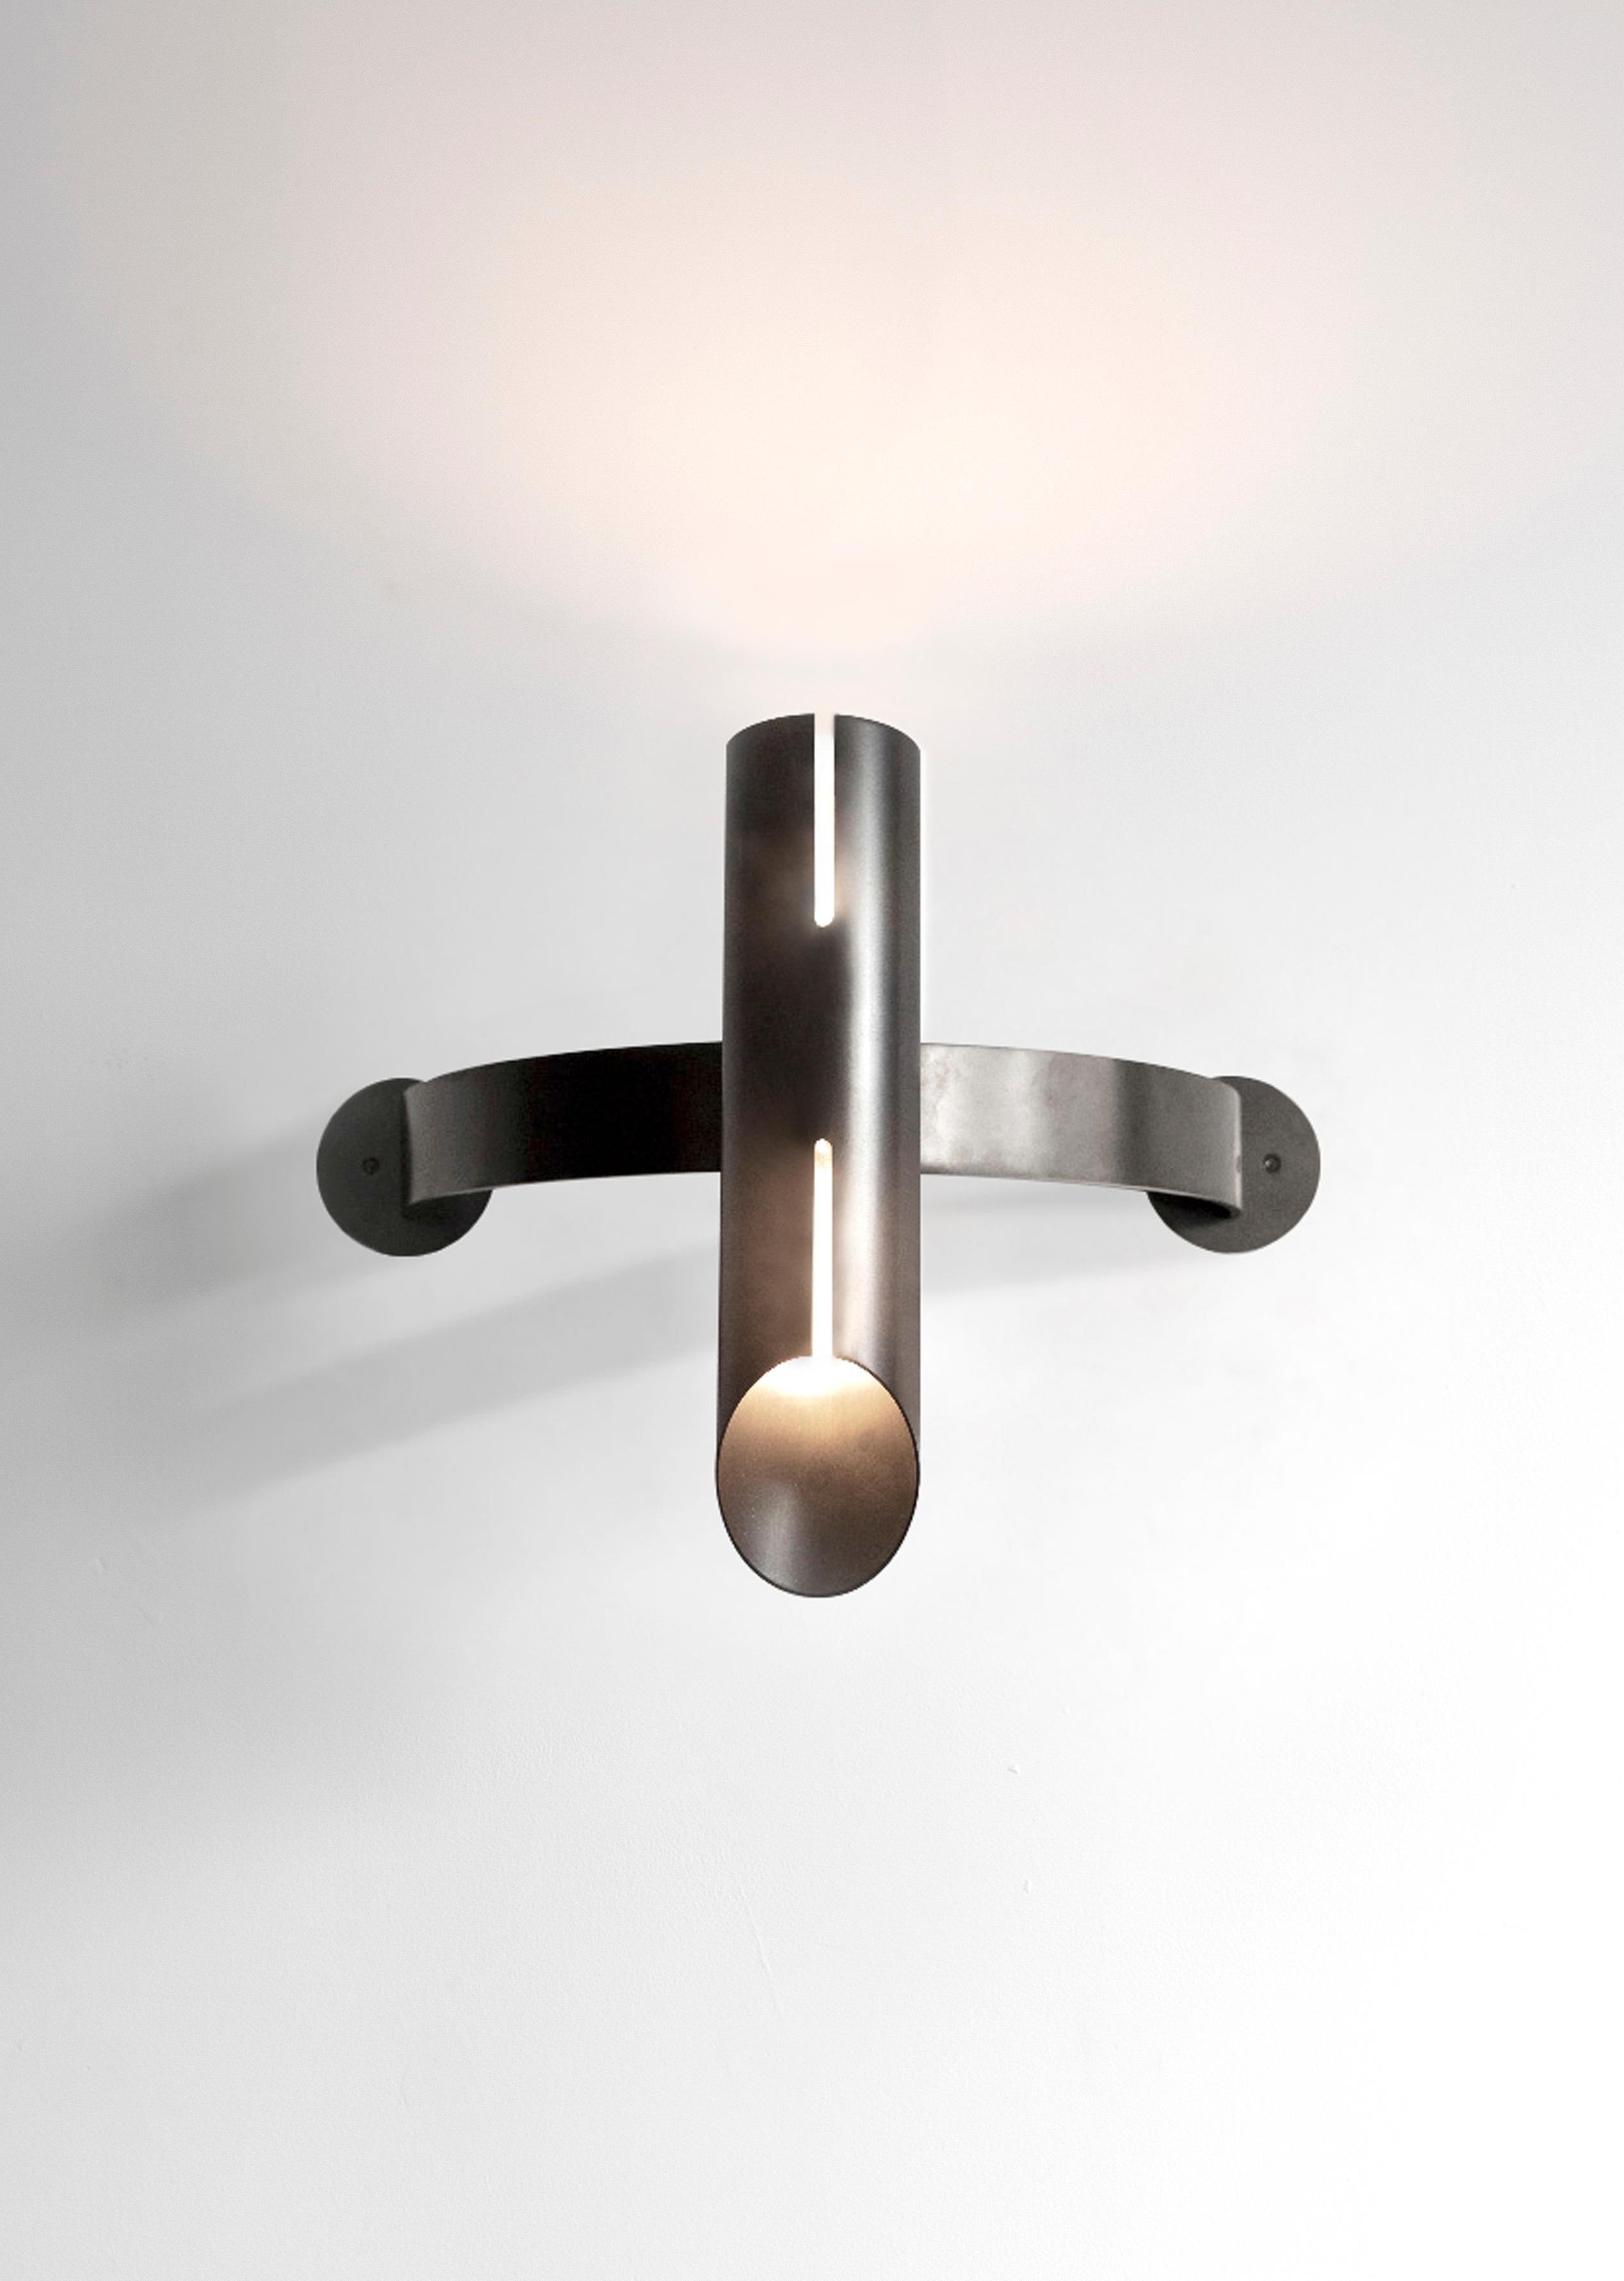 The Aro collection further explores the industrial design inspiration of the Switch and Navis collections with a more robust profile.

The Aro Half-Moon sconce extends the fixture’s projection by pairing the curvilinear extension with the strong